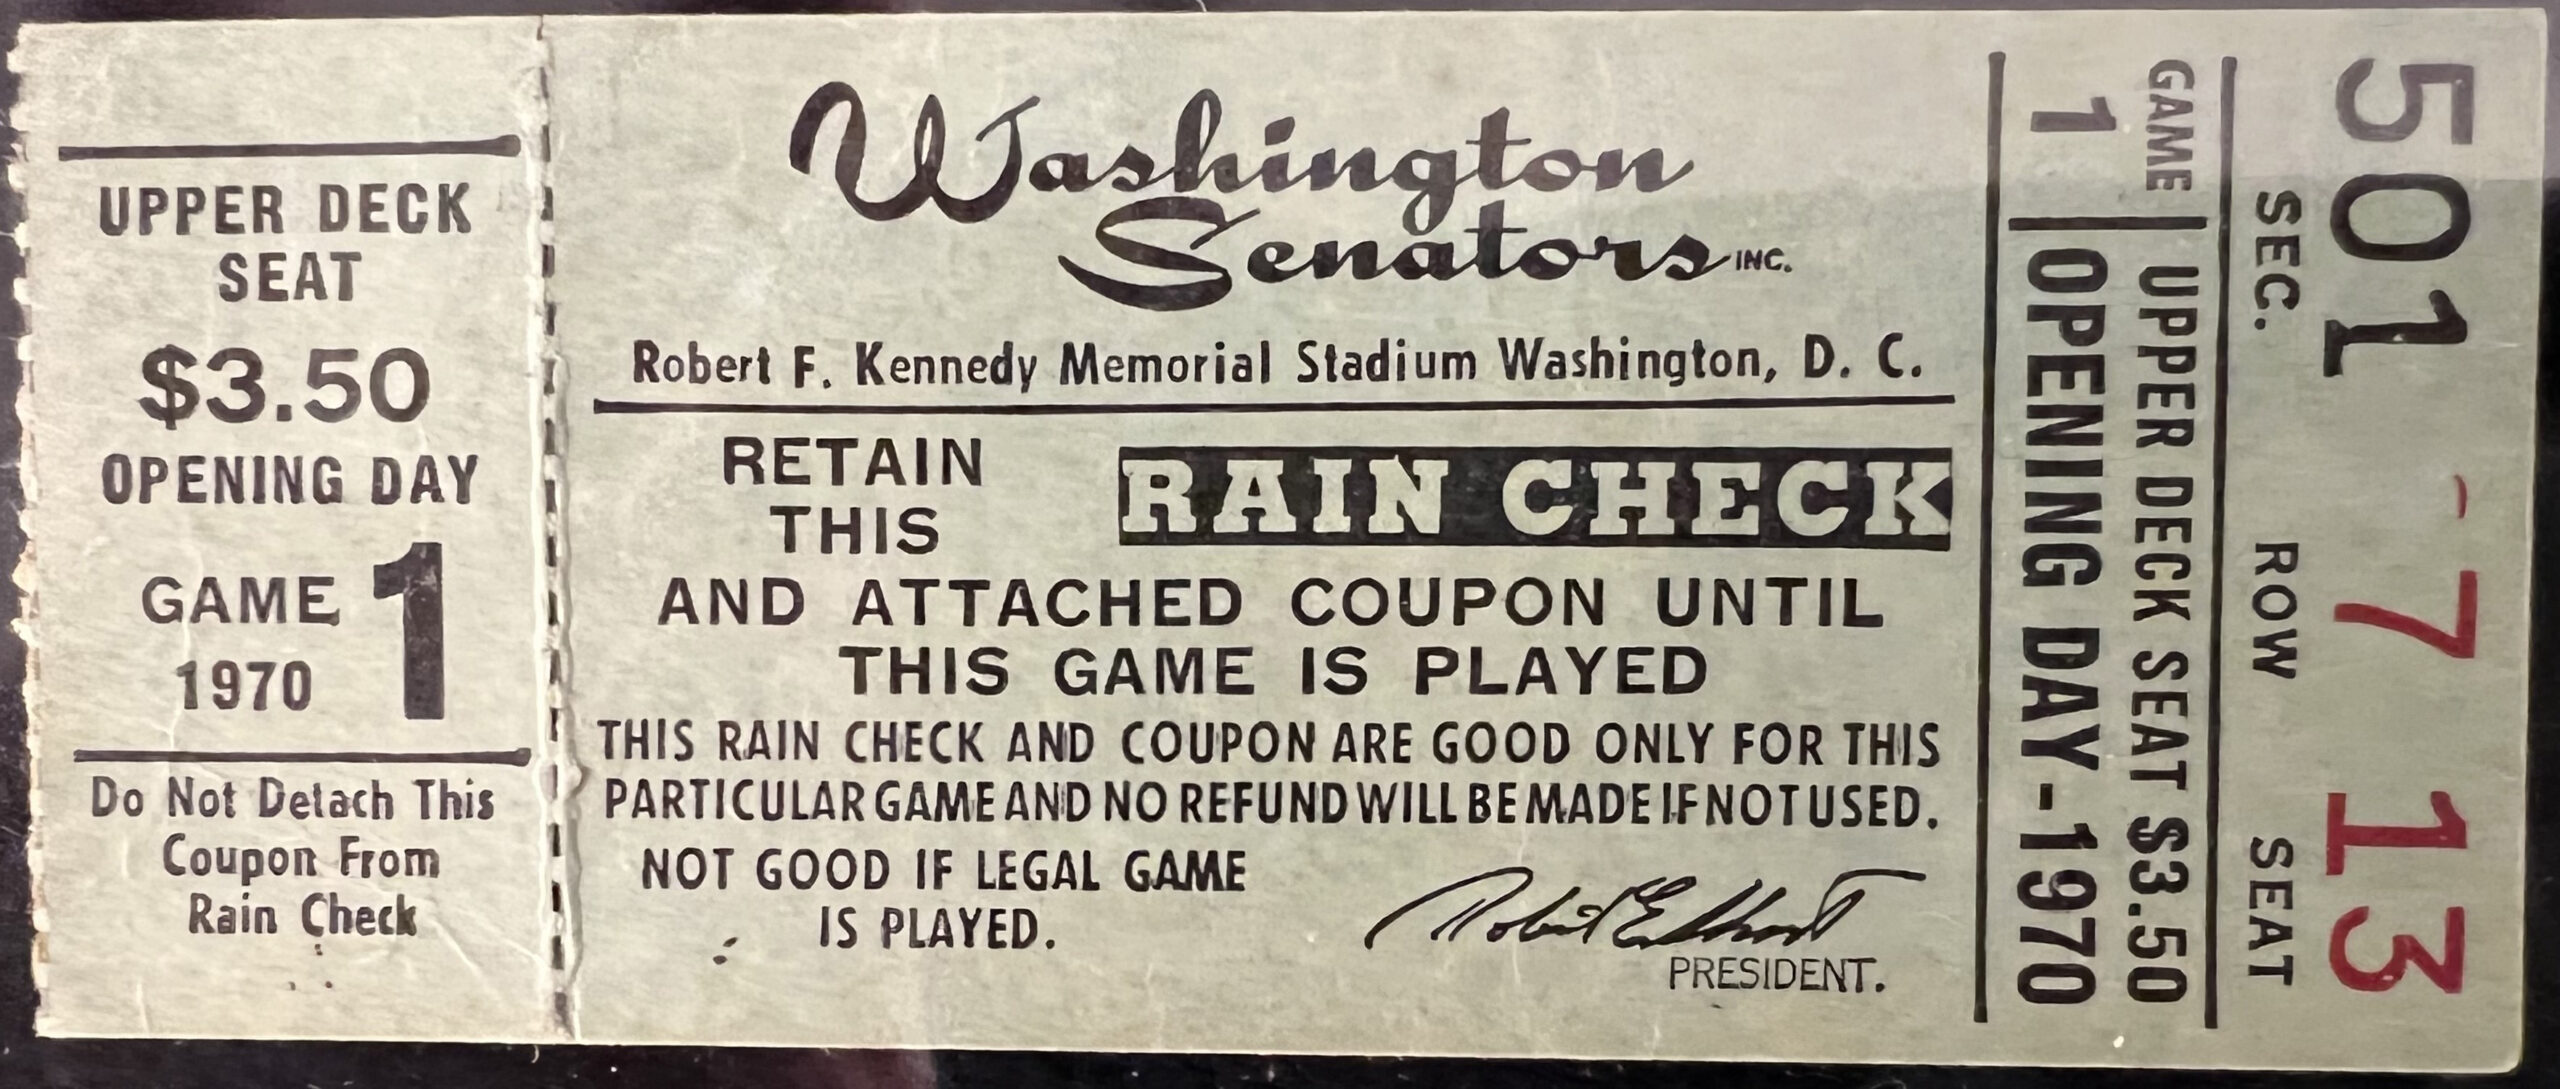 Ticket Stub from Opening day 1970